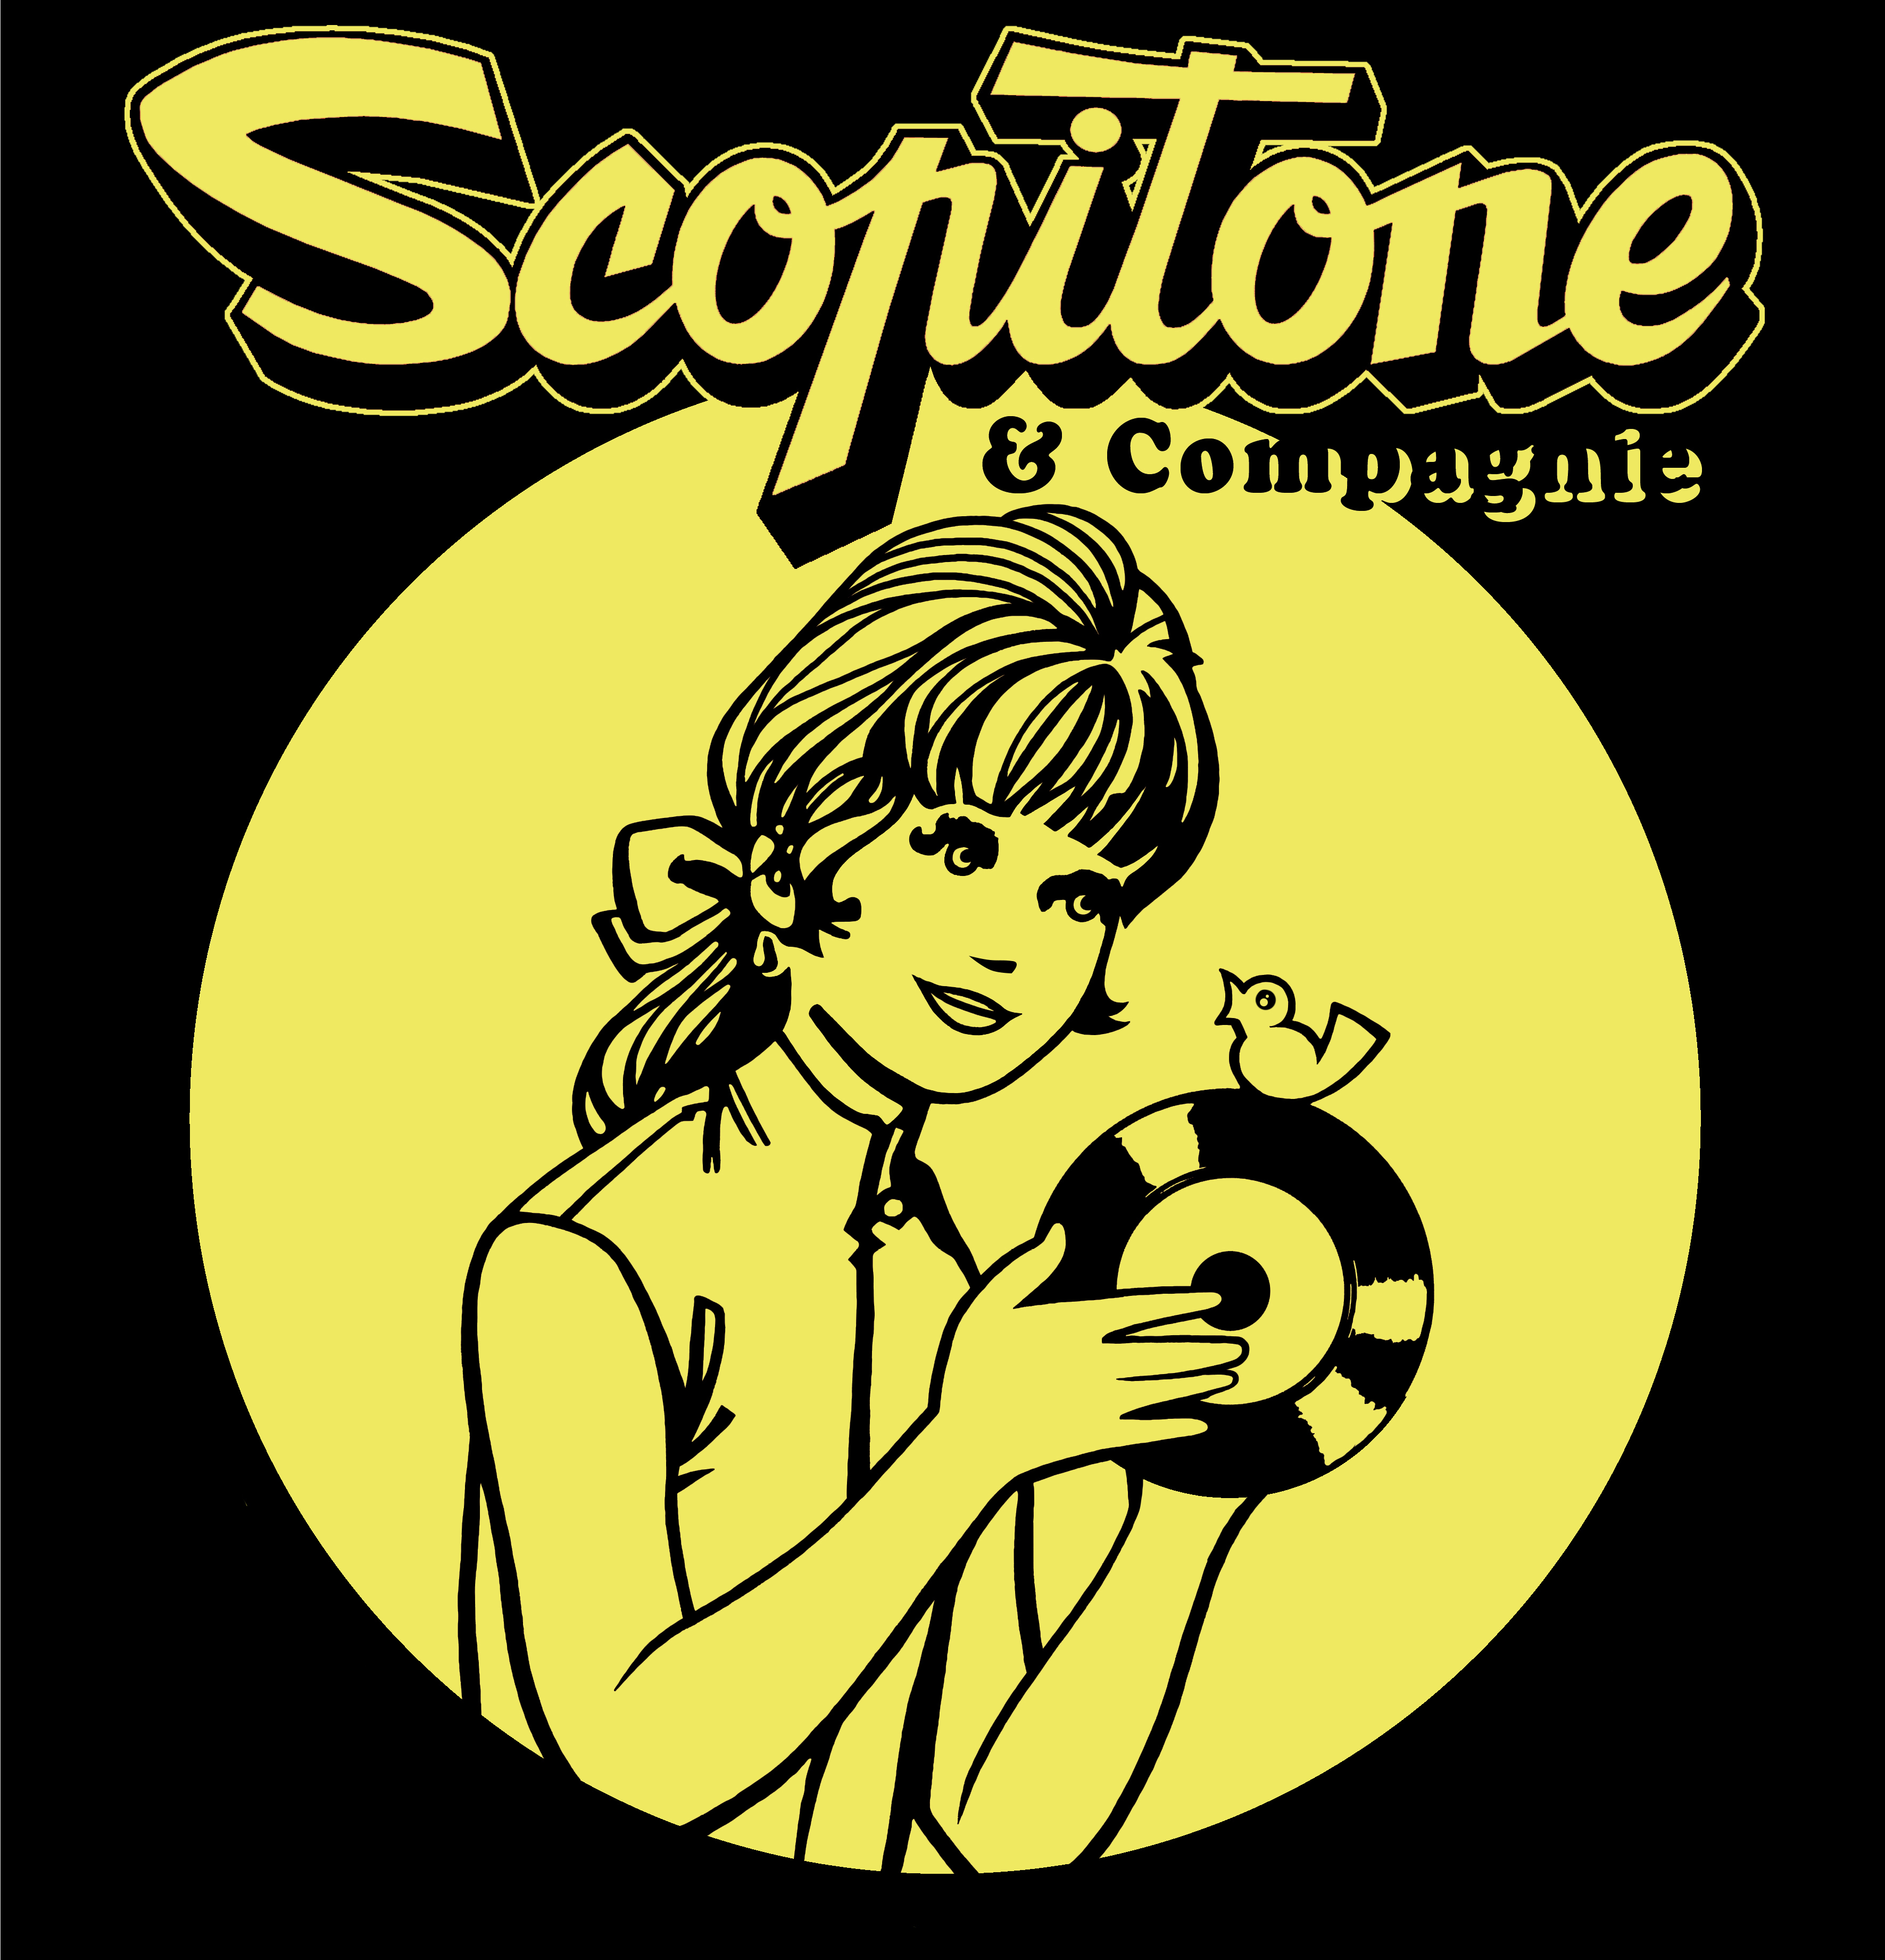 Once upon a time / Scopitone & Cie